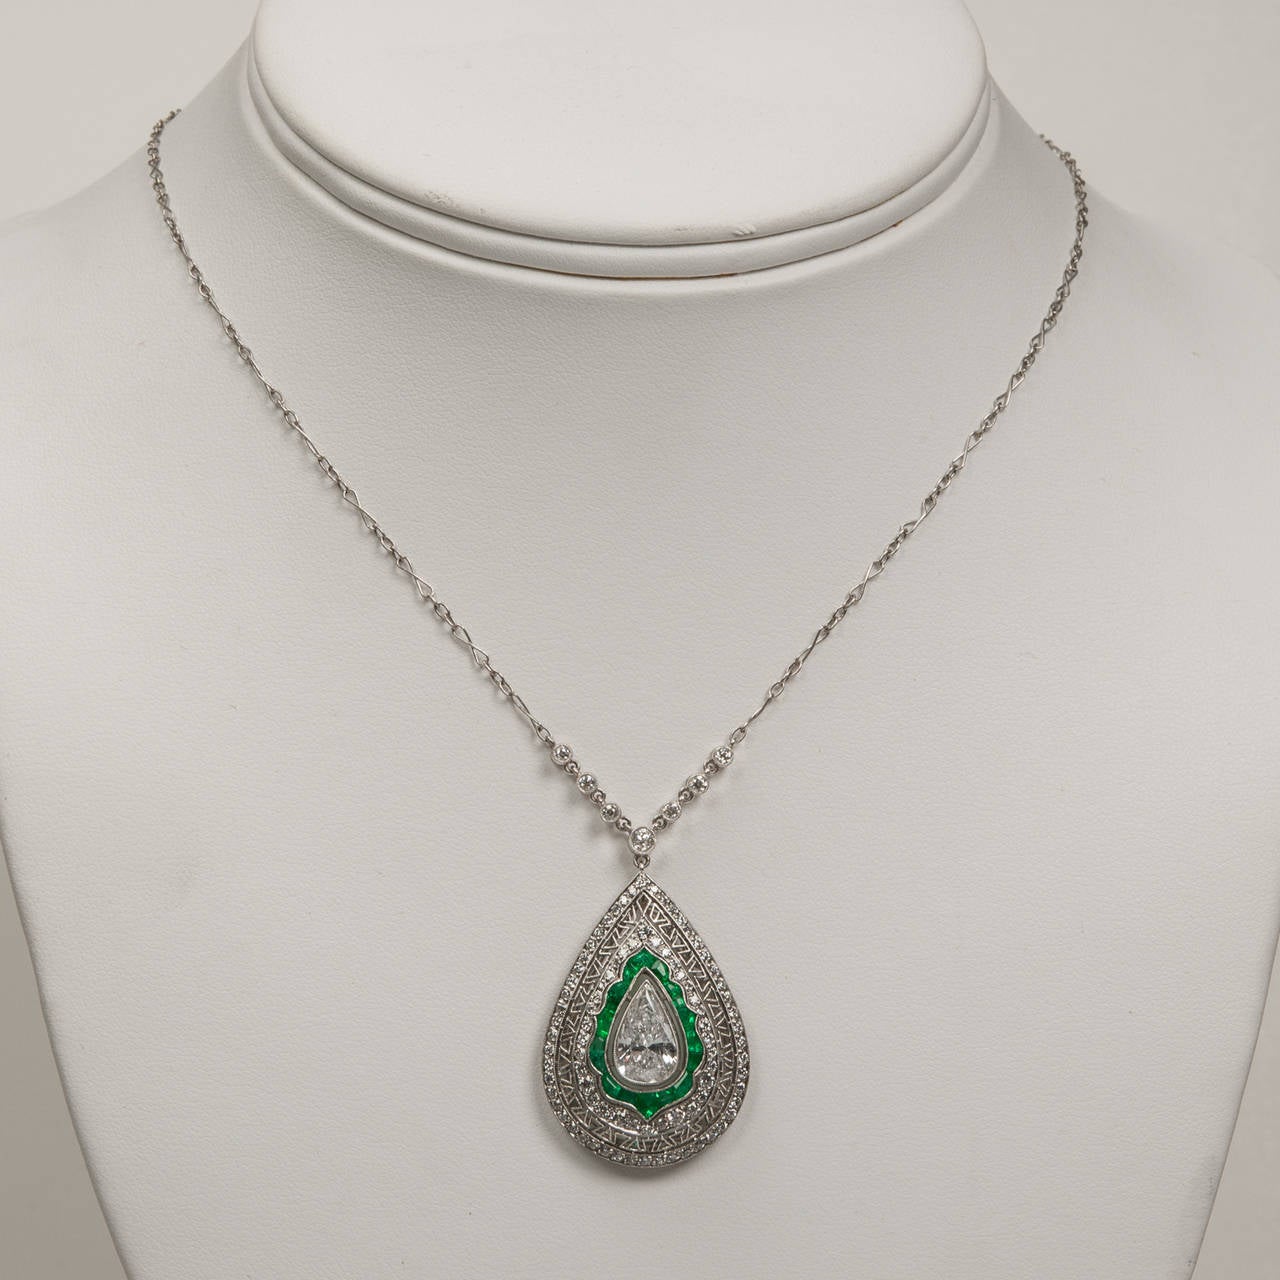 This newly made emerald and diamond necklace is handcrafted in platinum with bright white diamonds and colorful emerald gemstones in an Art Deco design style.  The pear shape drop has a stunning 1.55 carat center diamond (K color, SI2 clarity)